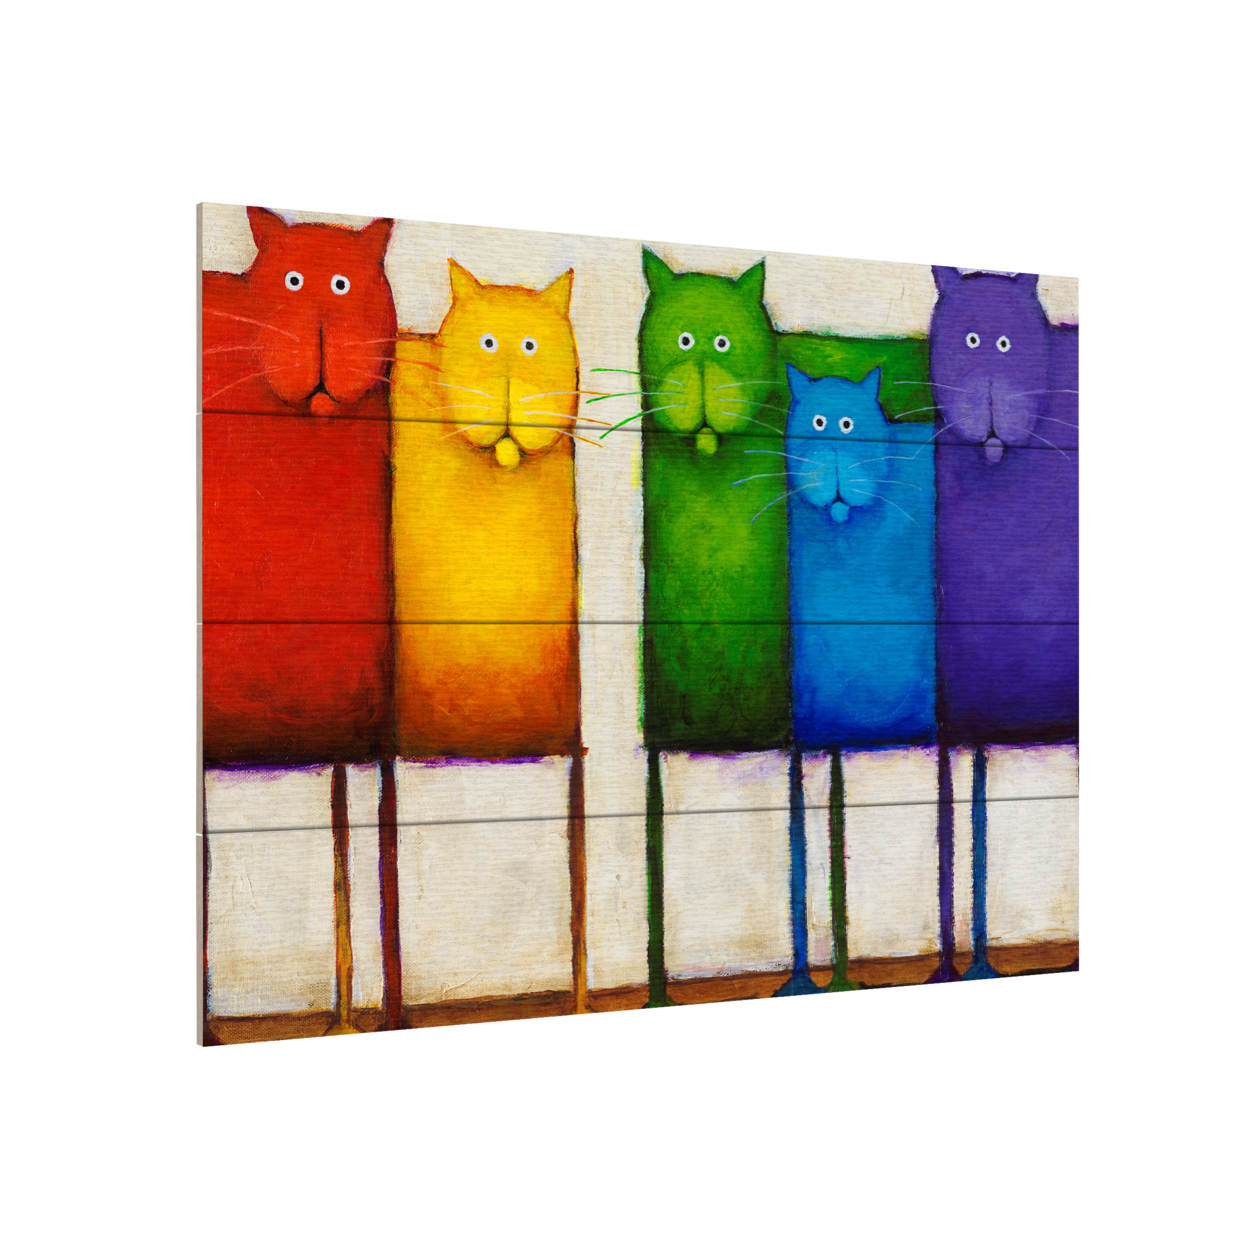 Wall Art 12 X 16 Inches Titled Rainbow Cats Ready To Hang Printed On Wooden Planks